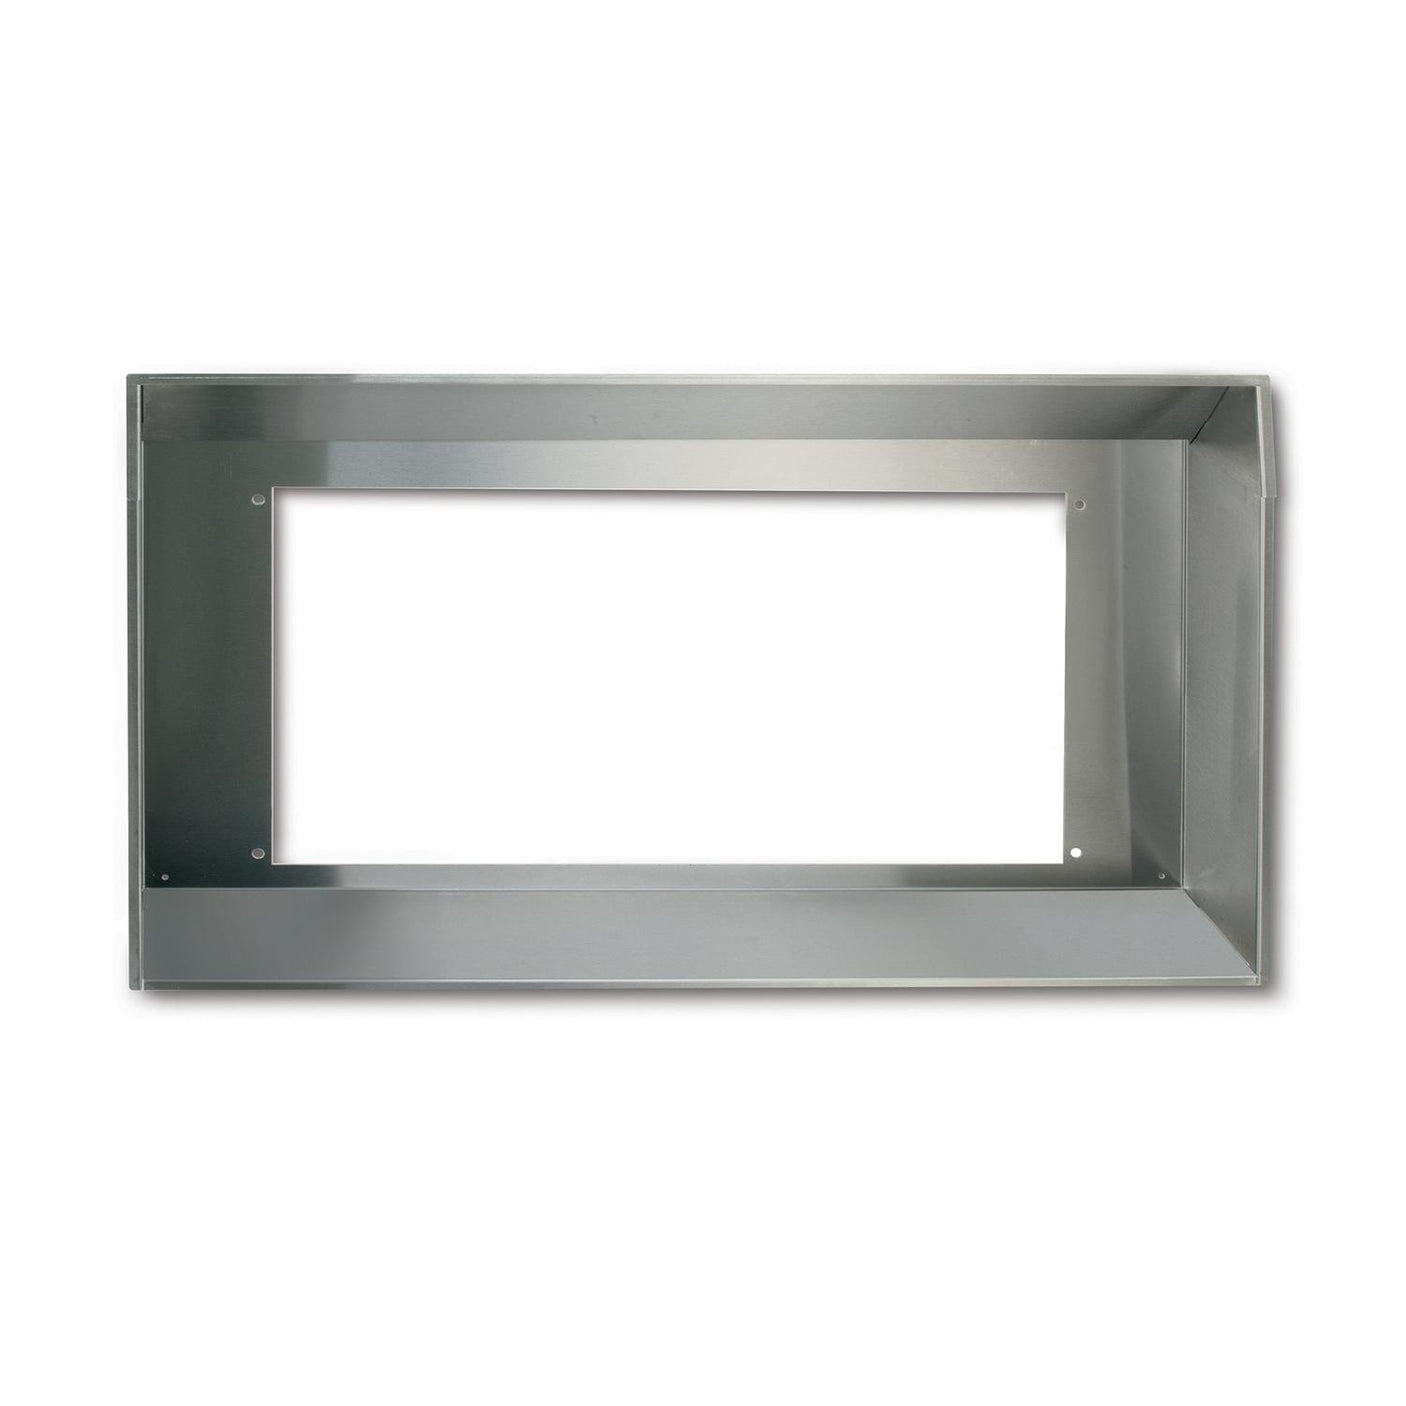 **DISCONTINUED** Broan® Elite 36-Inch wide Custom Hood Liner to fit PM500SS built-in hood, in Stainless Steel